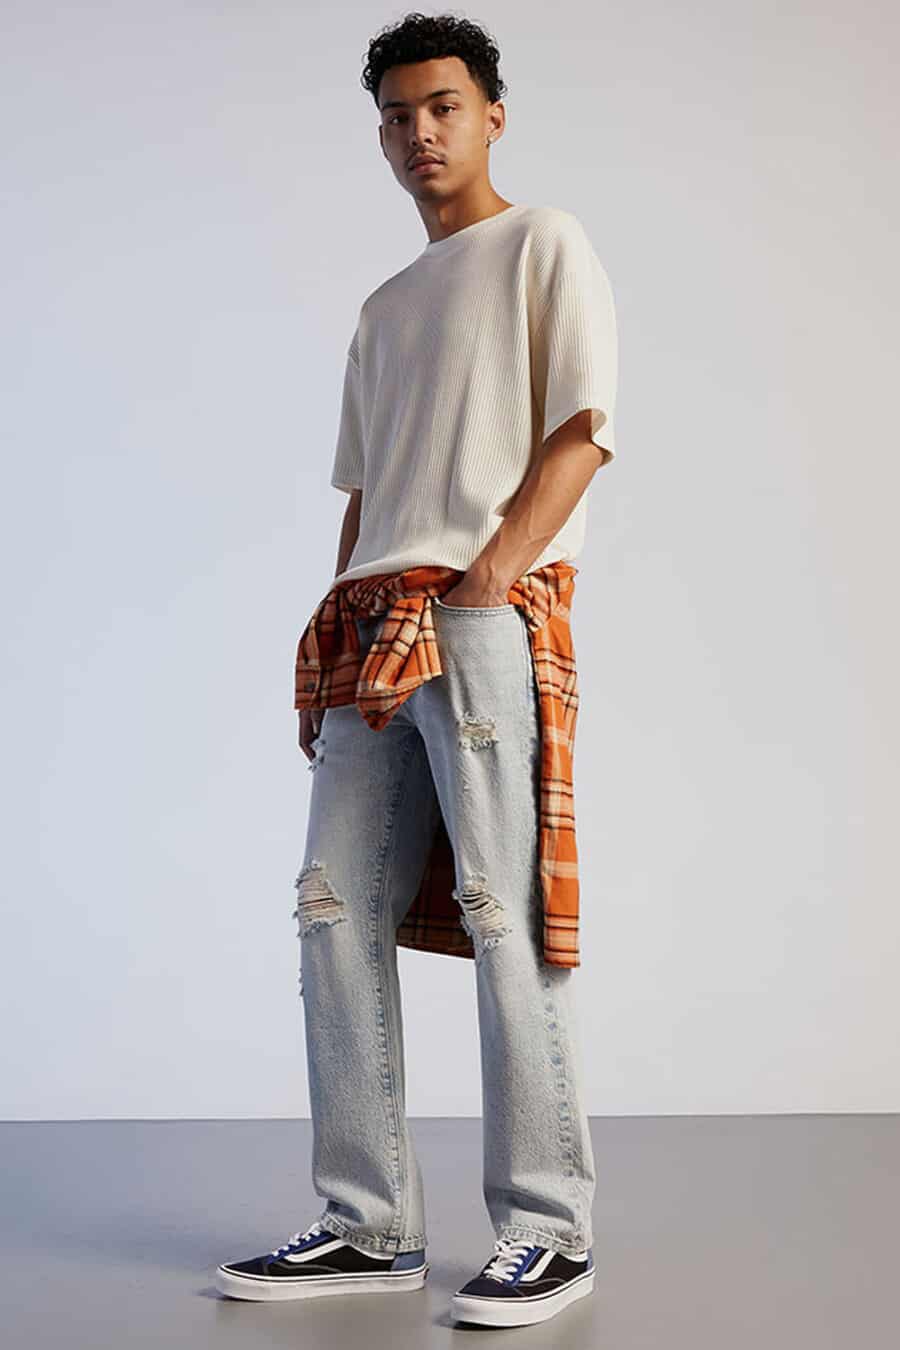 Men's ripped light wash jeans, white oversized T-shirt, orange/yellow check flannel shirt and Vans Authentic sneakers grunge outfit